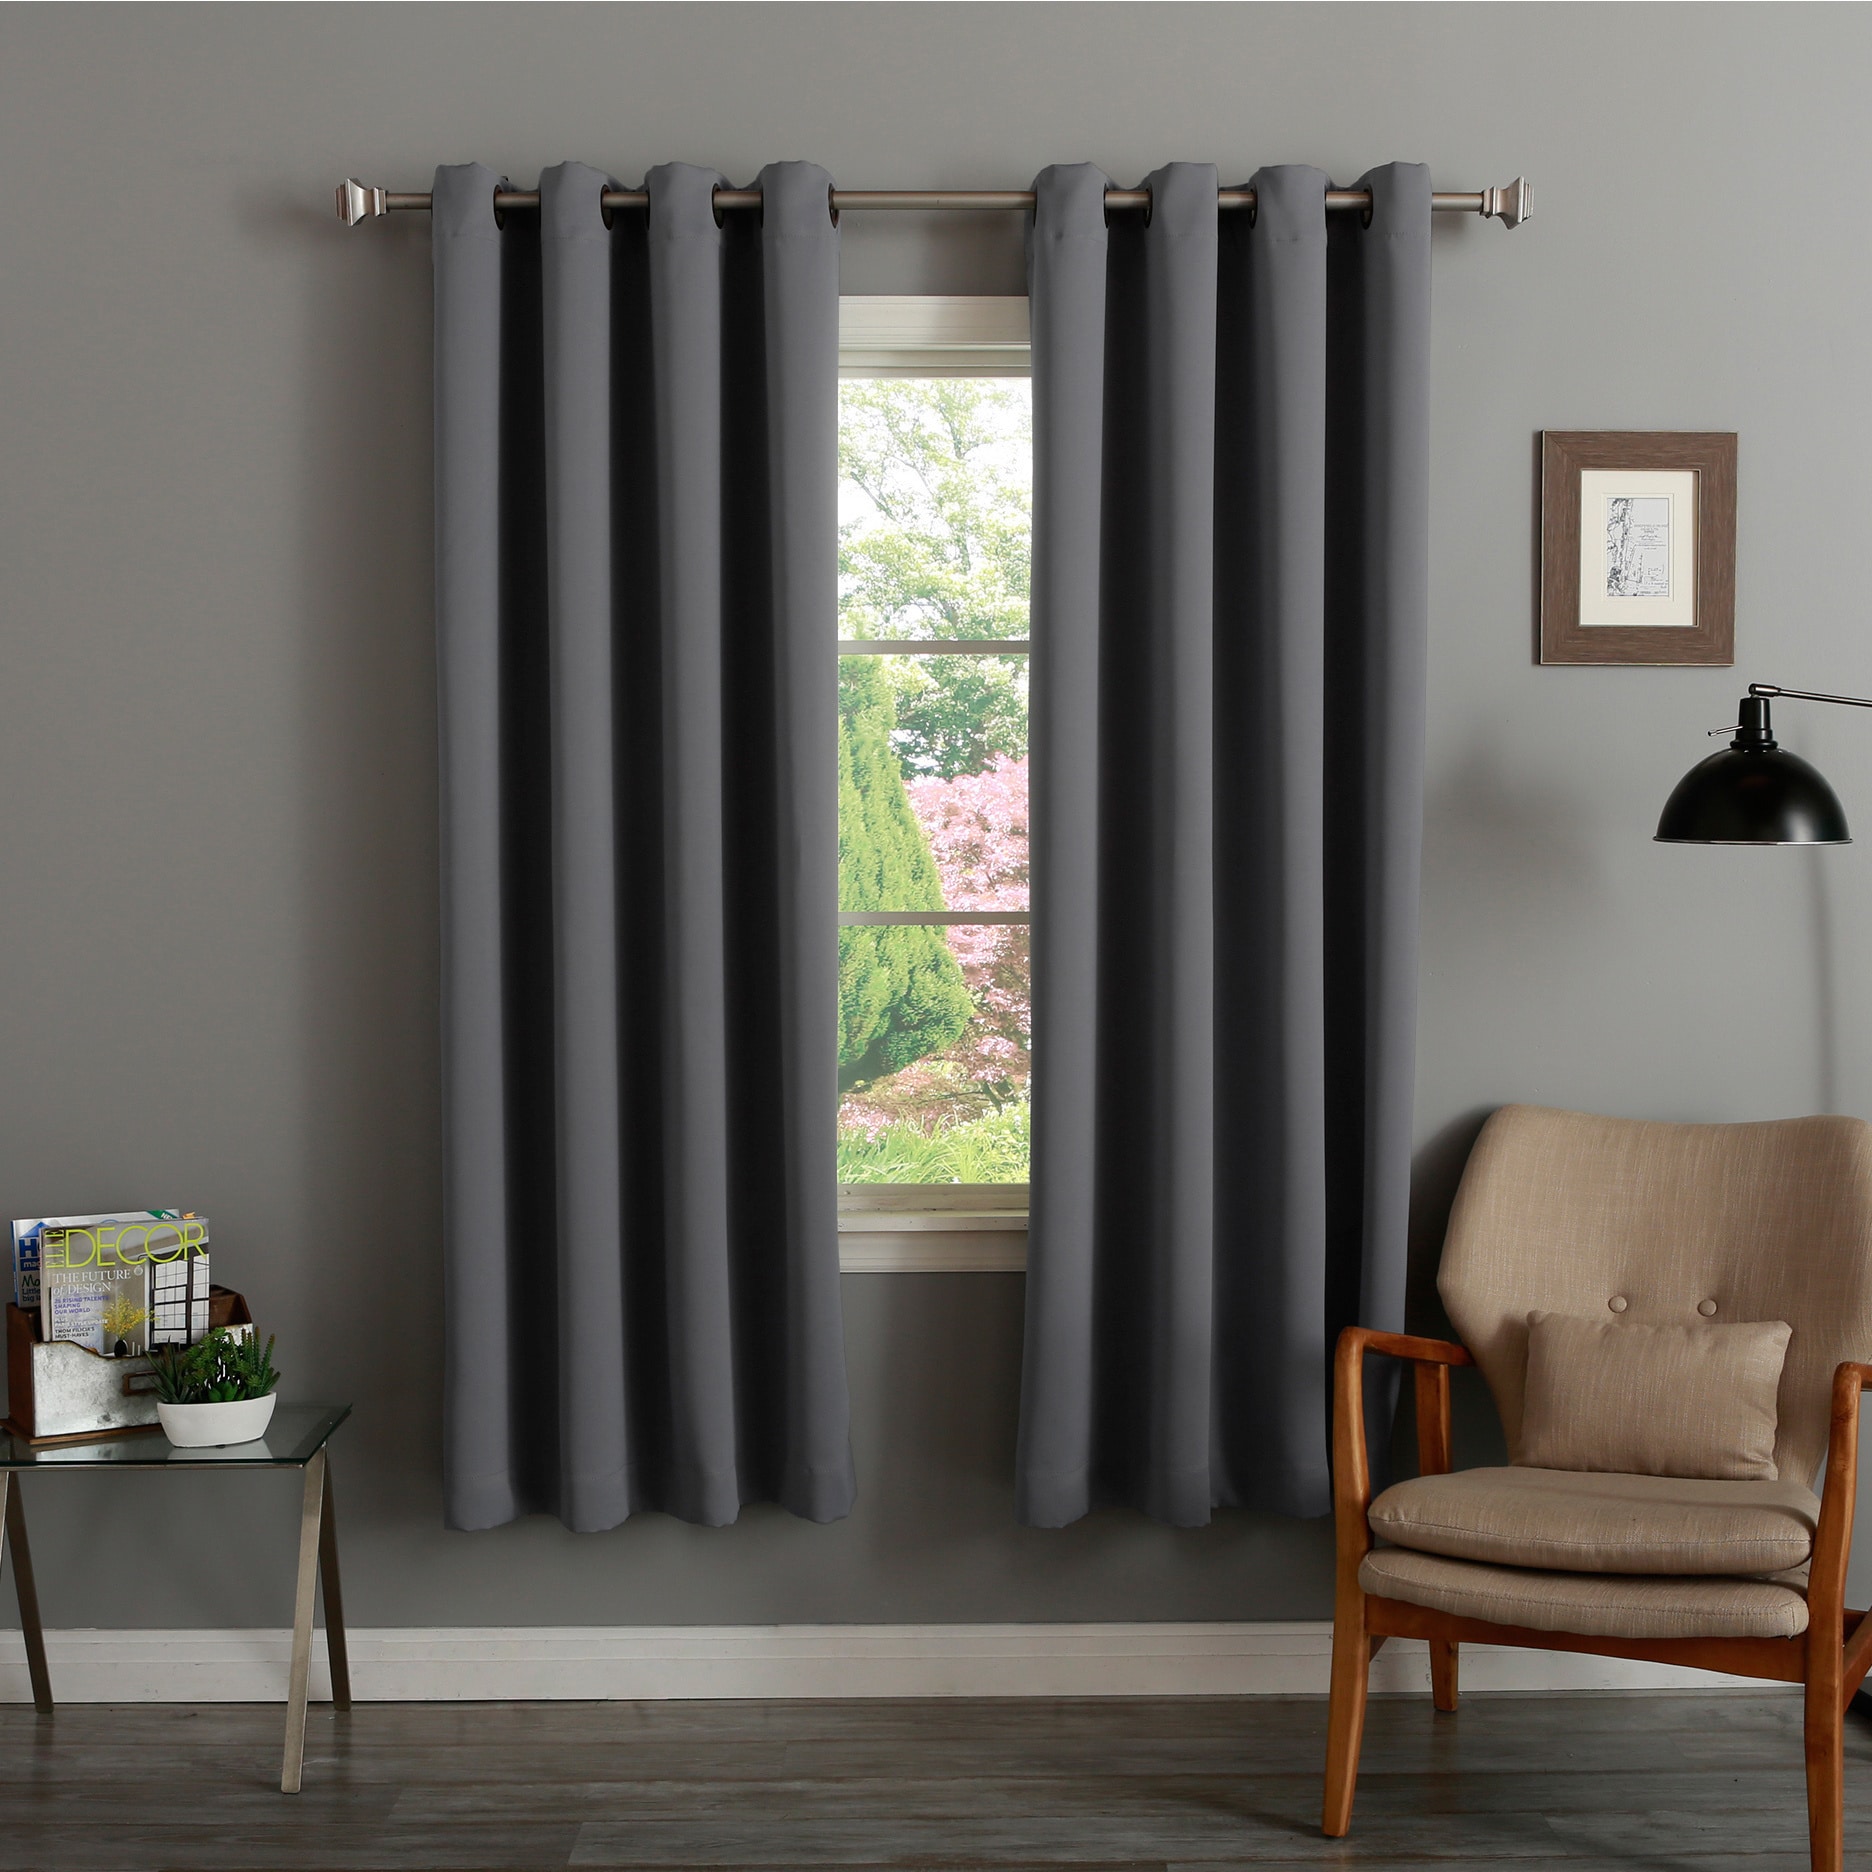 72 inch wide blackout curtains